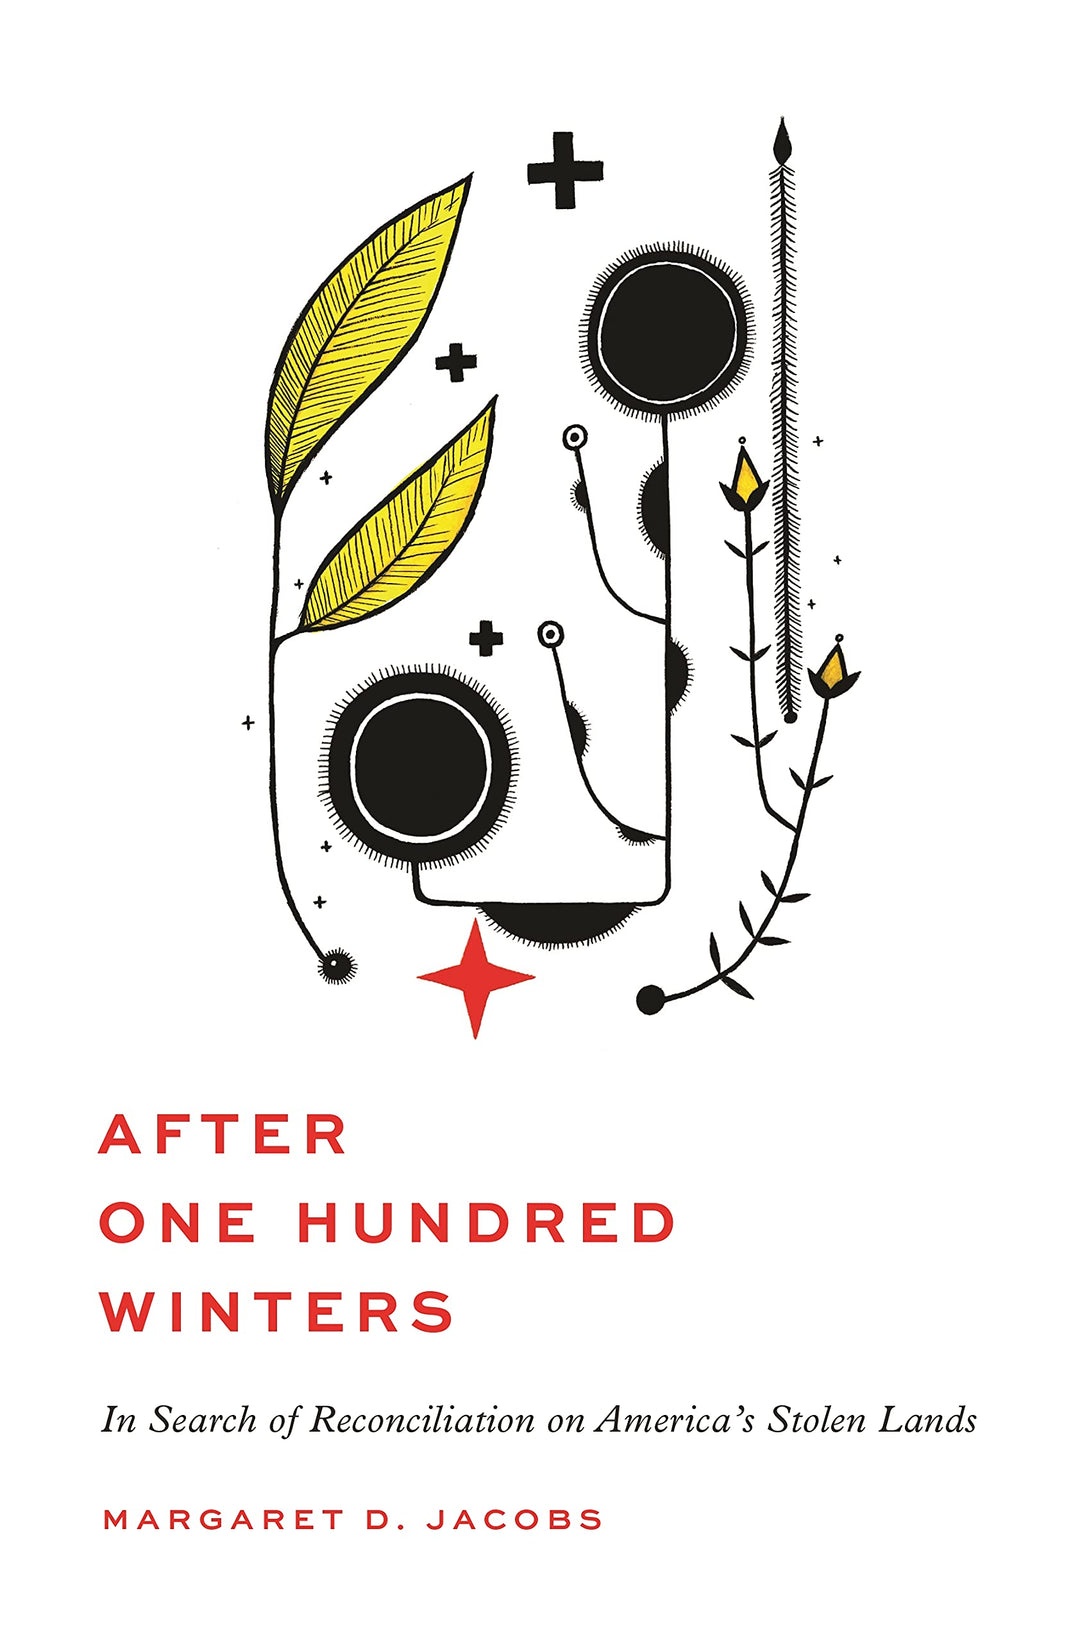 After One Hundred Winters by Margaret Jacobs